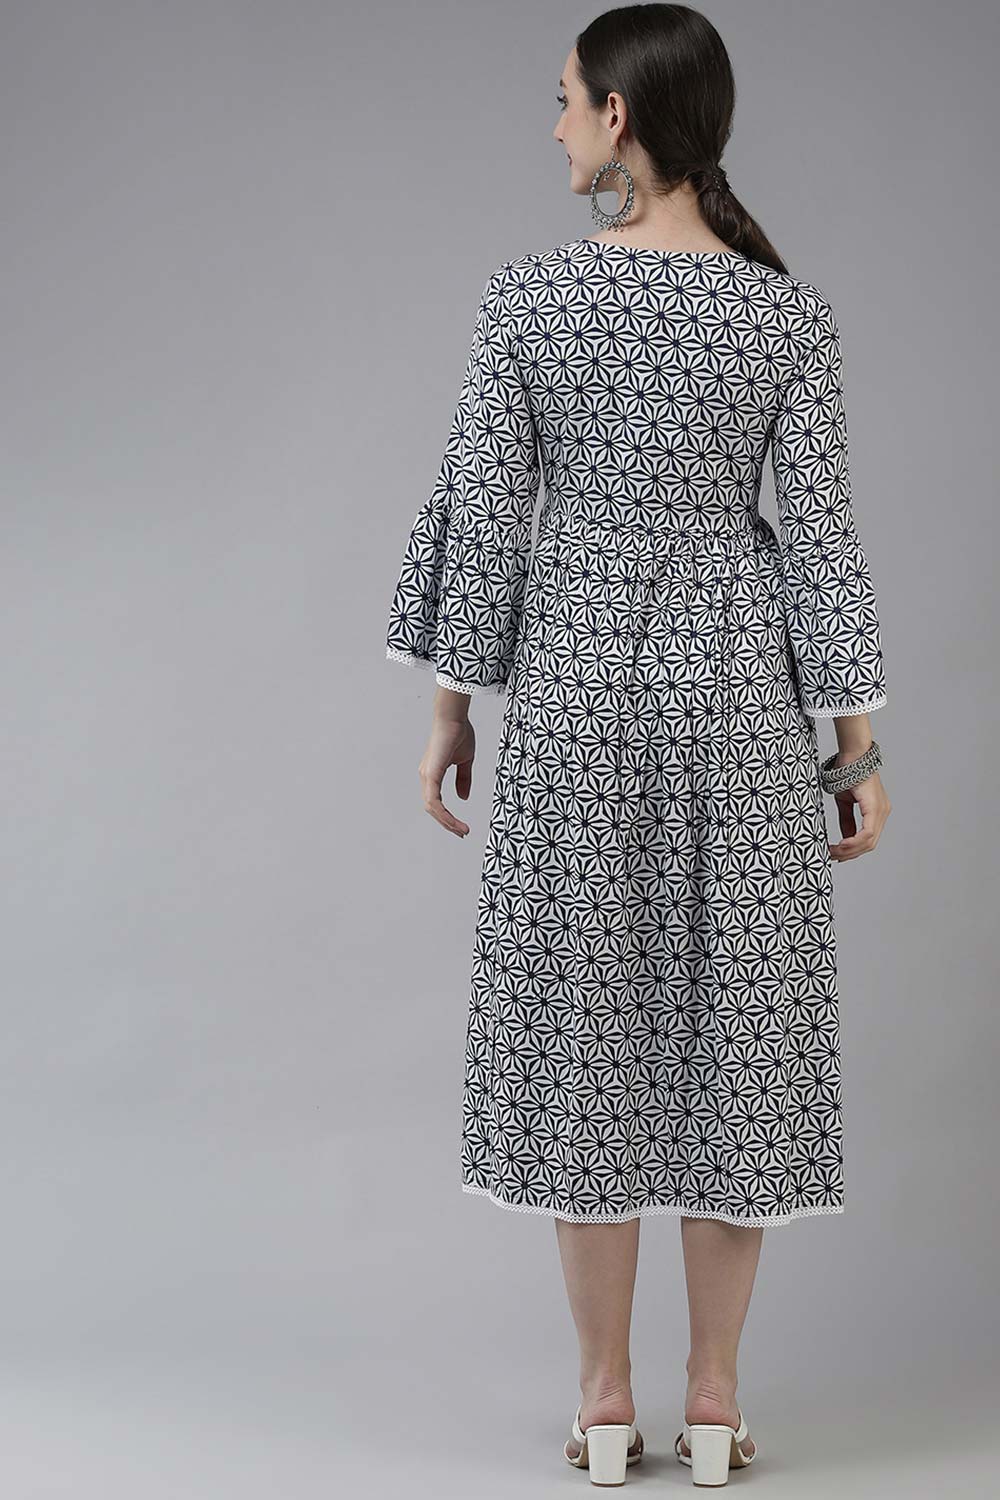 Navy Blue Viscose Rayon Embroidery And Lace Cotton Dress